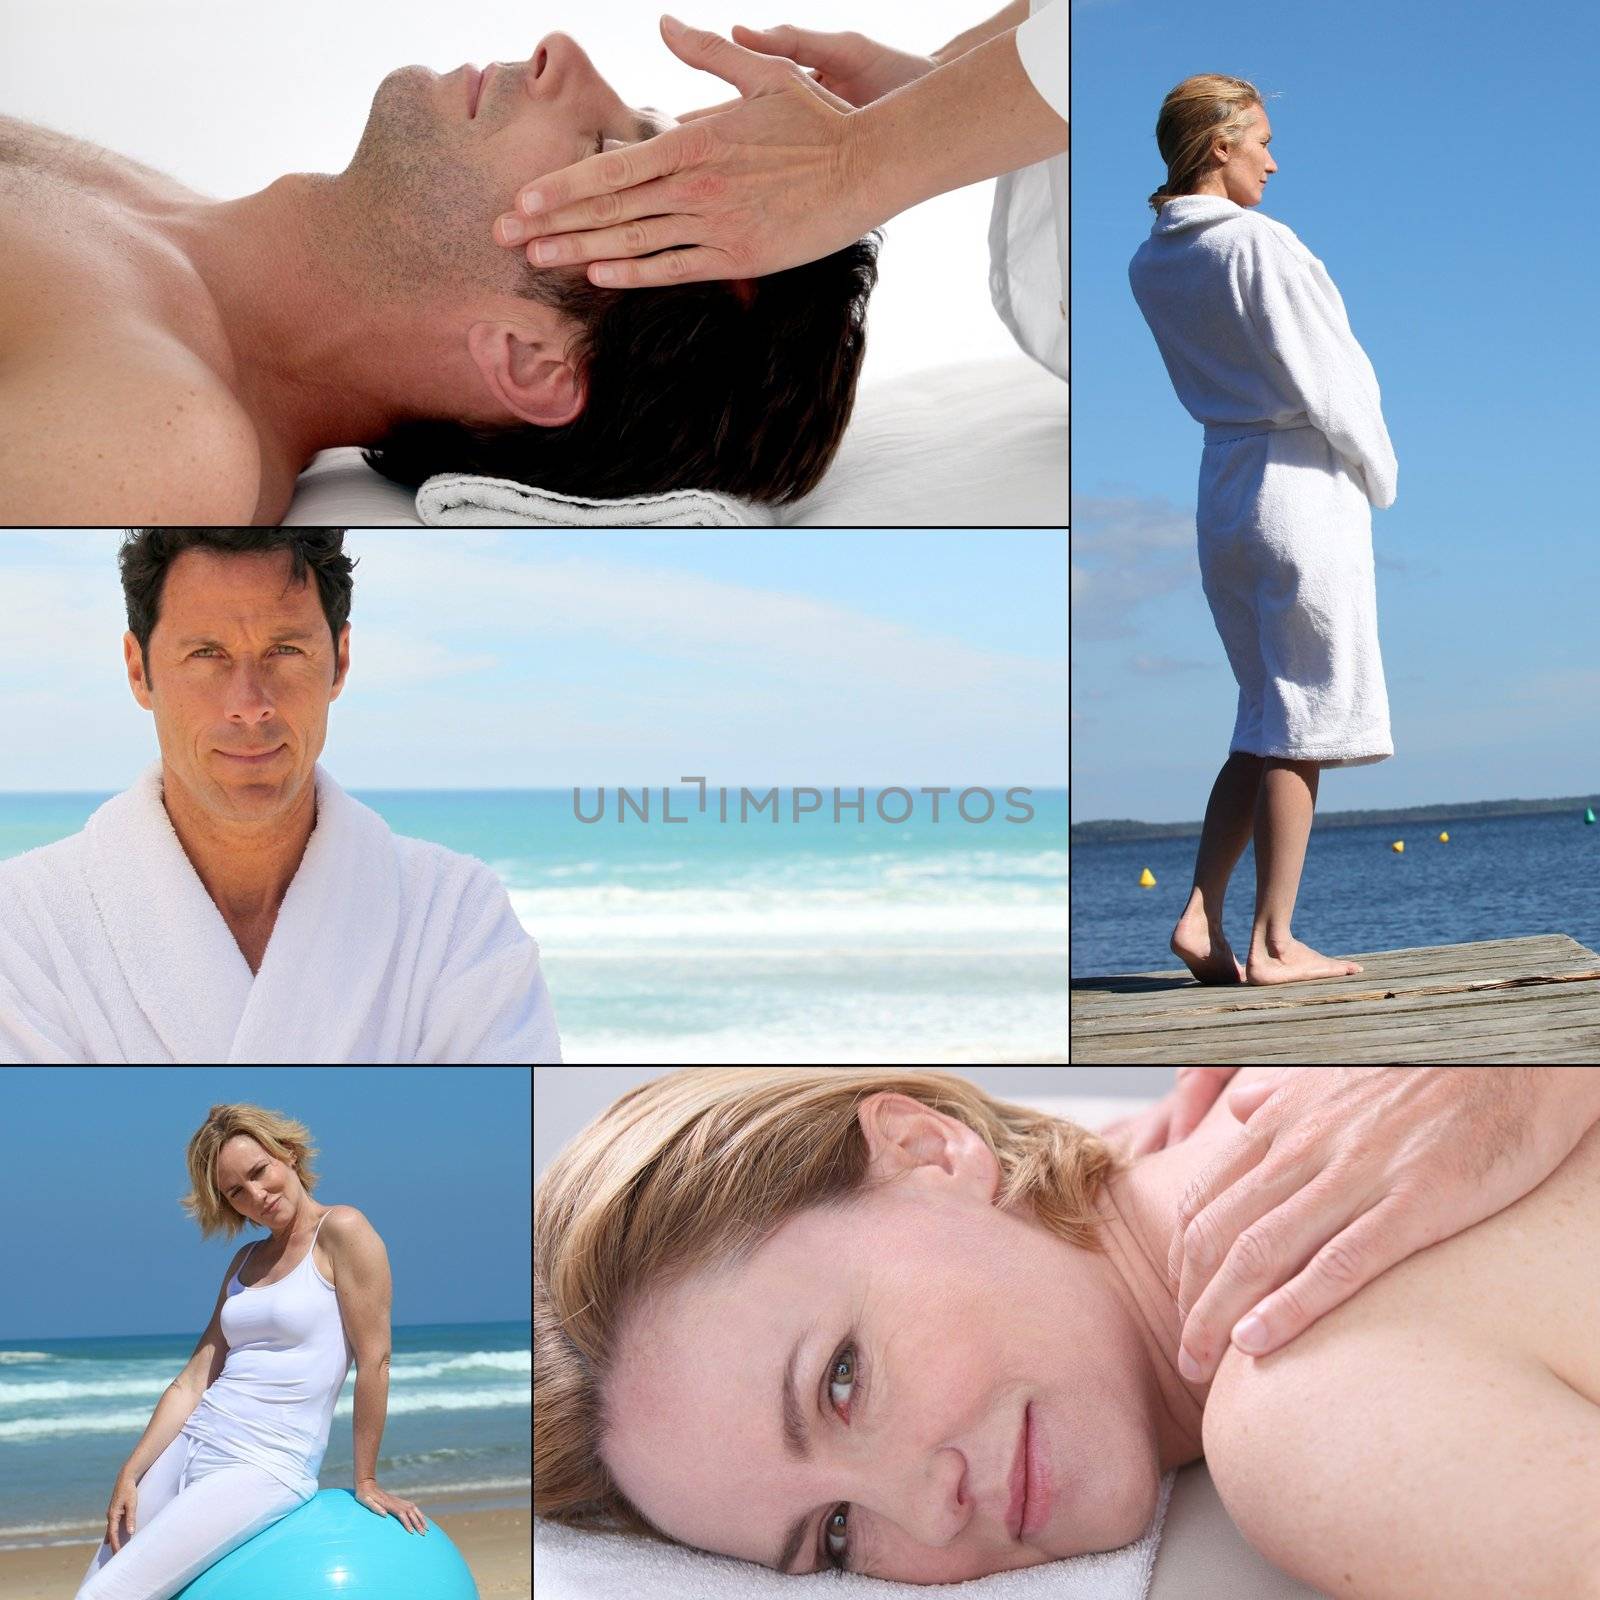 Wellbeing and massage themed collage by phovoir